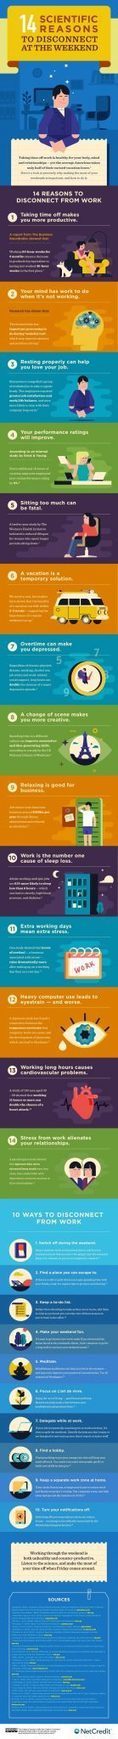 Why You Shouldn’t Work on Weekends Infographic | Heart_Matters - Faith, Family, & Love - What Really Matters! | Scoop.it